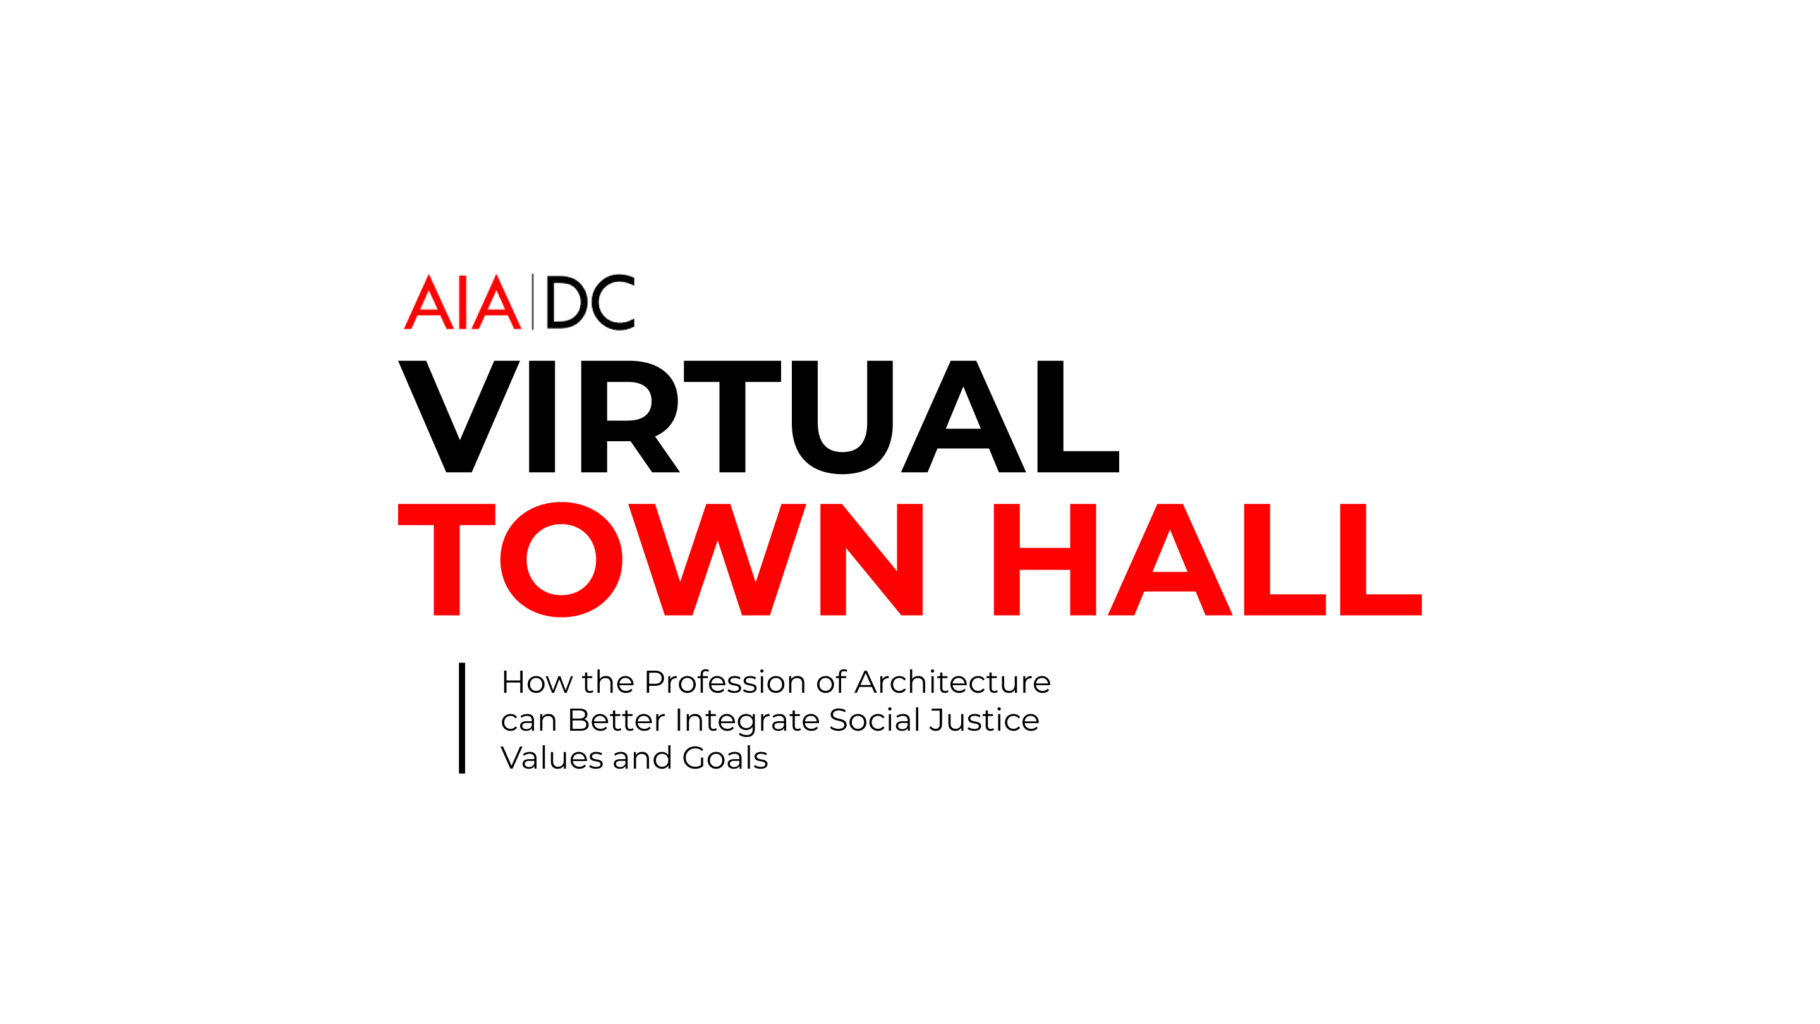 Michael Marshall Guest Panelist for AIA|DC Virtual Town Hall